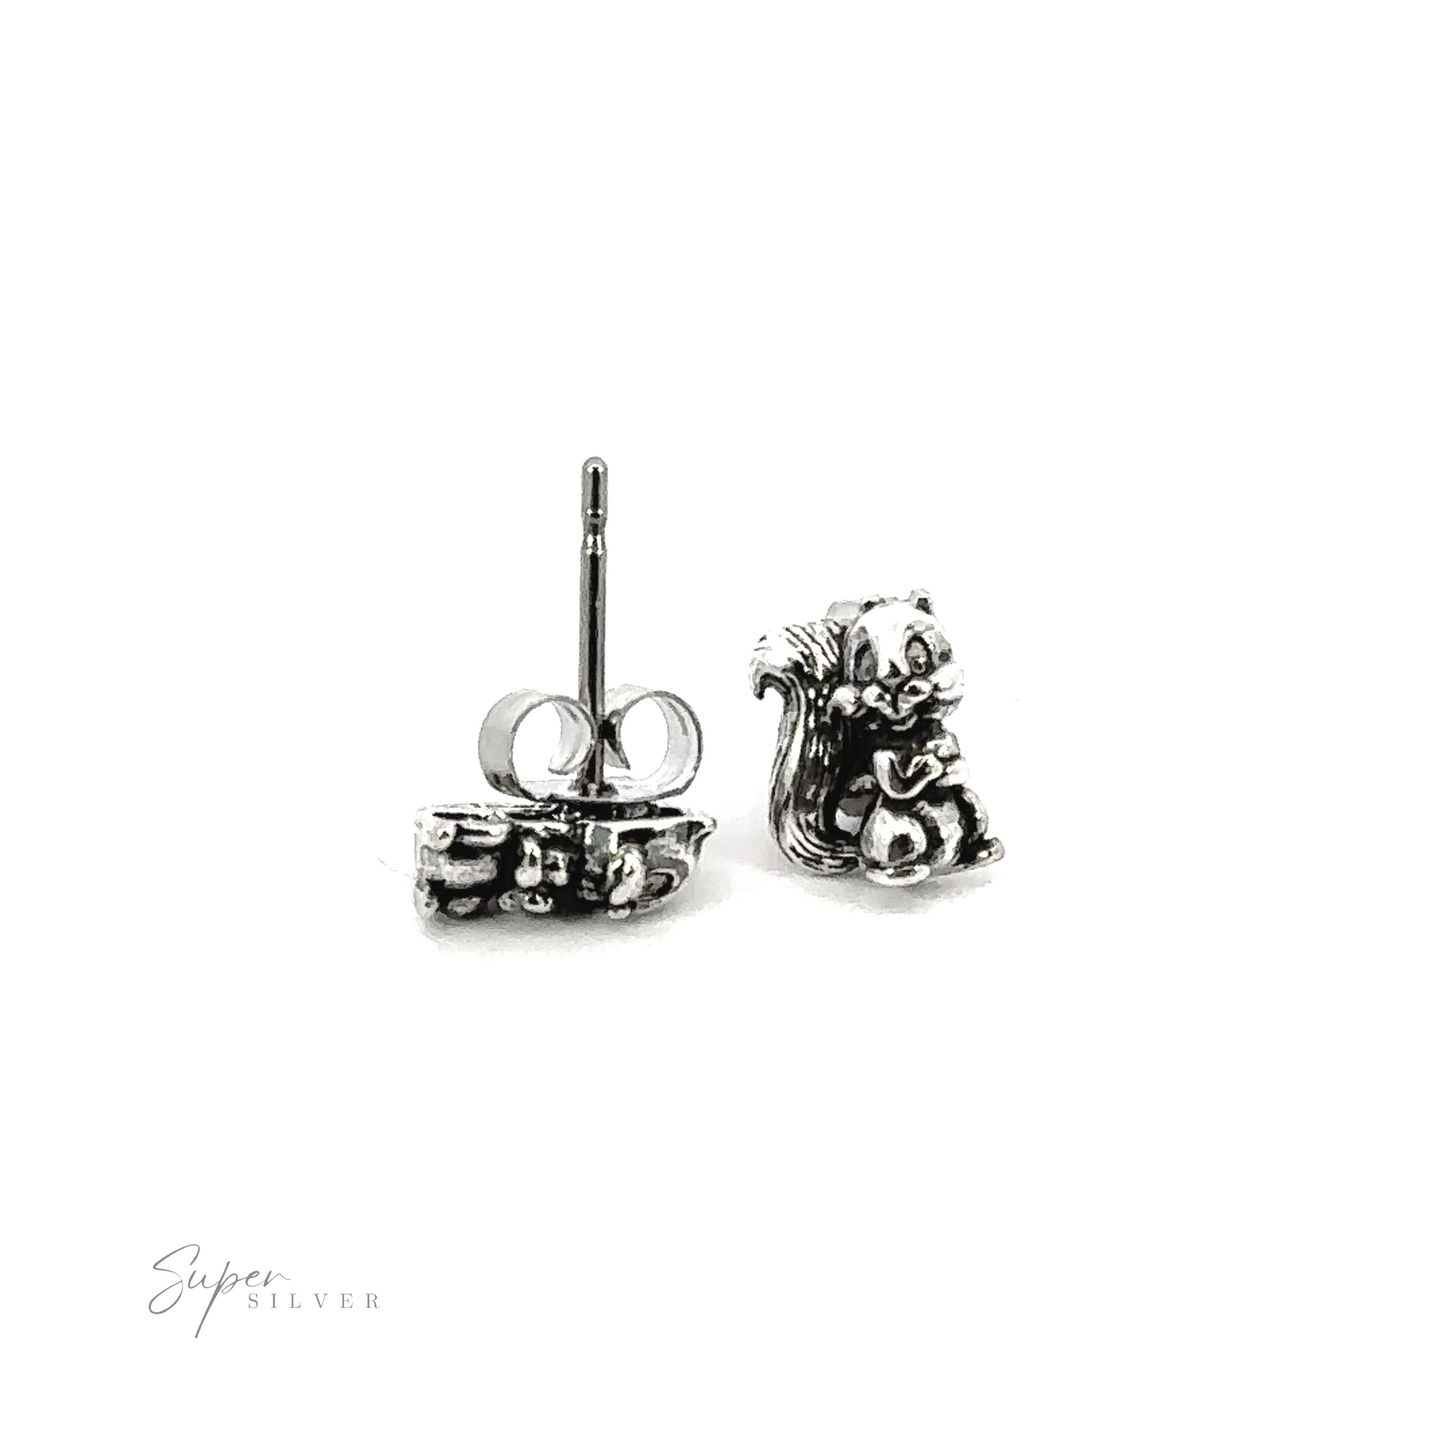 A pair of adorable Cute Squirrel Studs featuring cartoon squirrels on a white background.